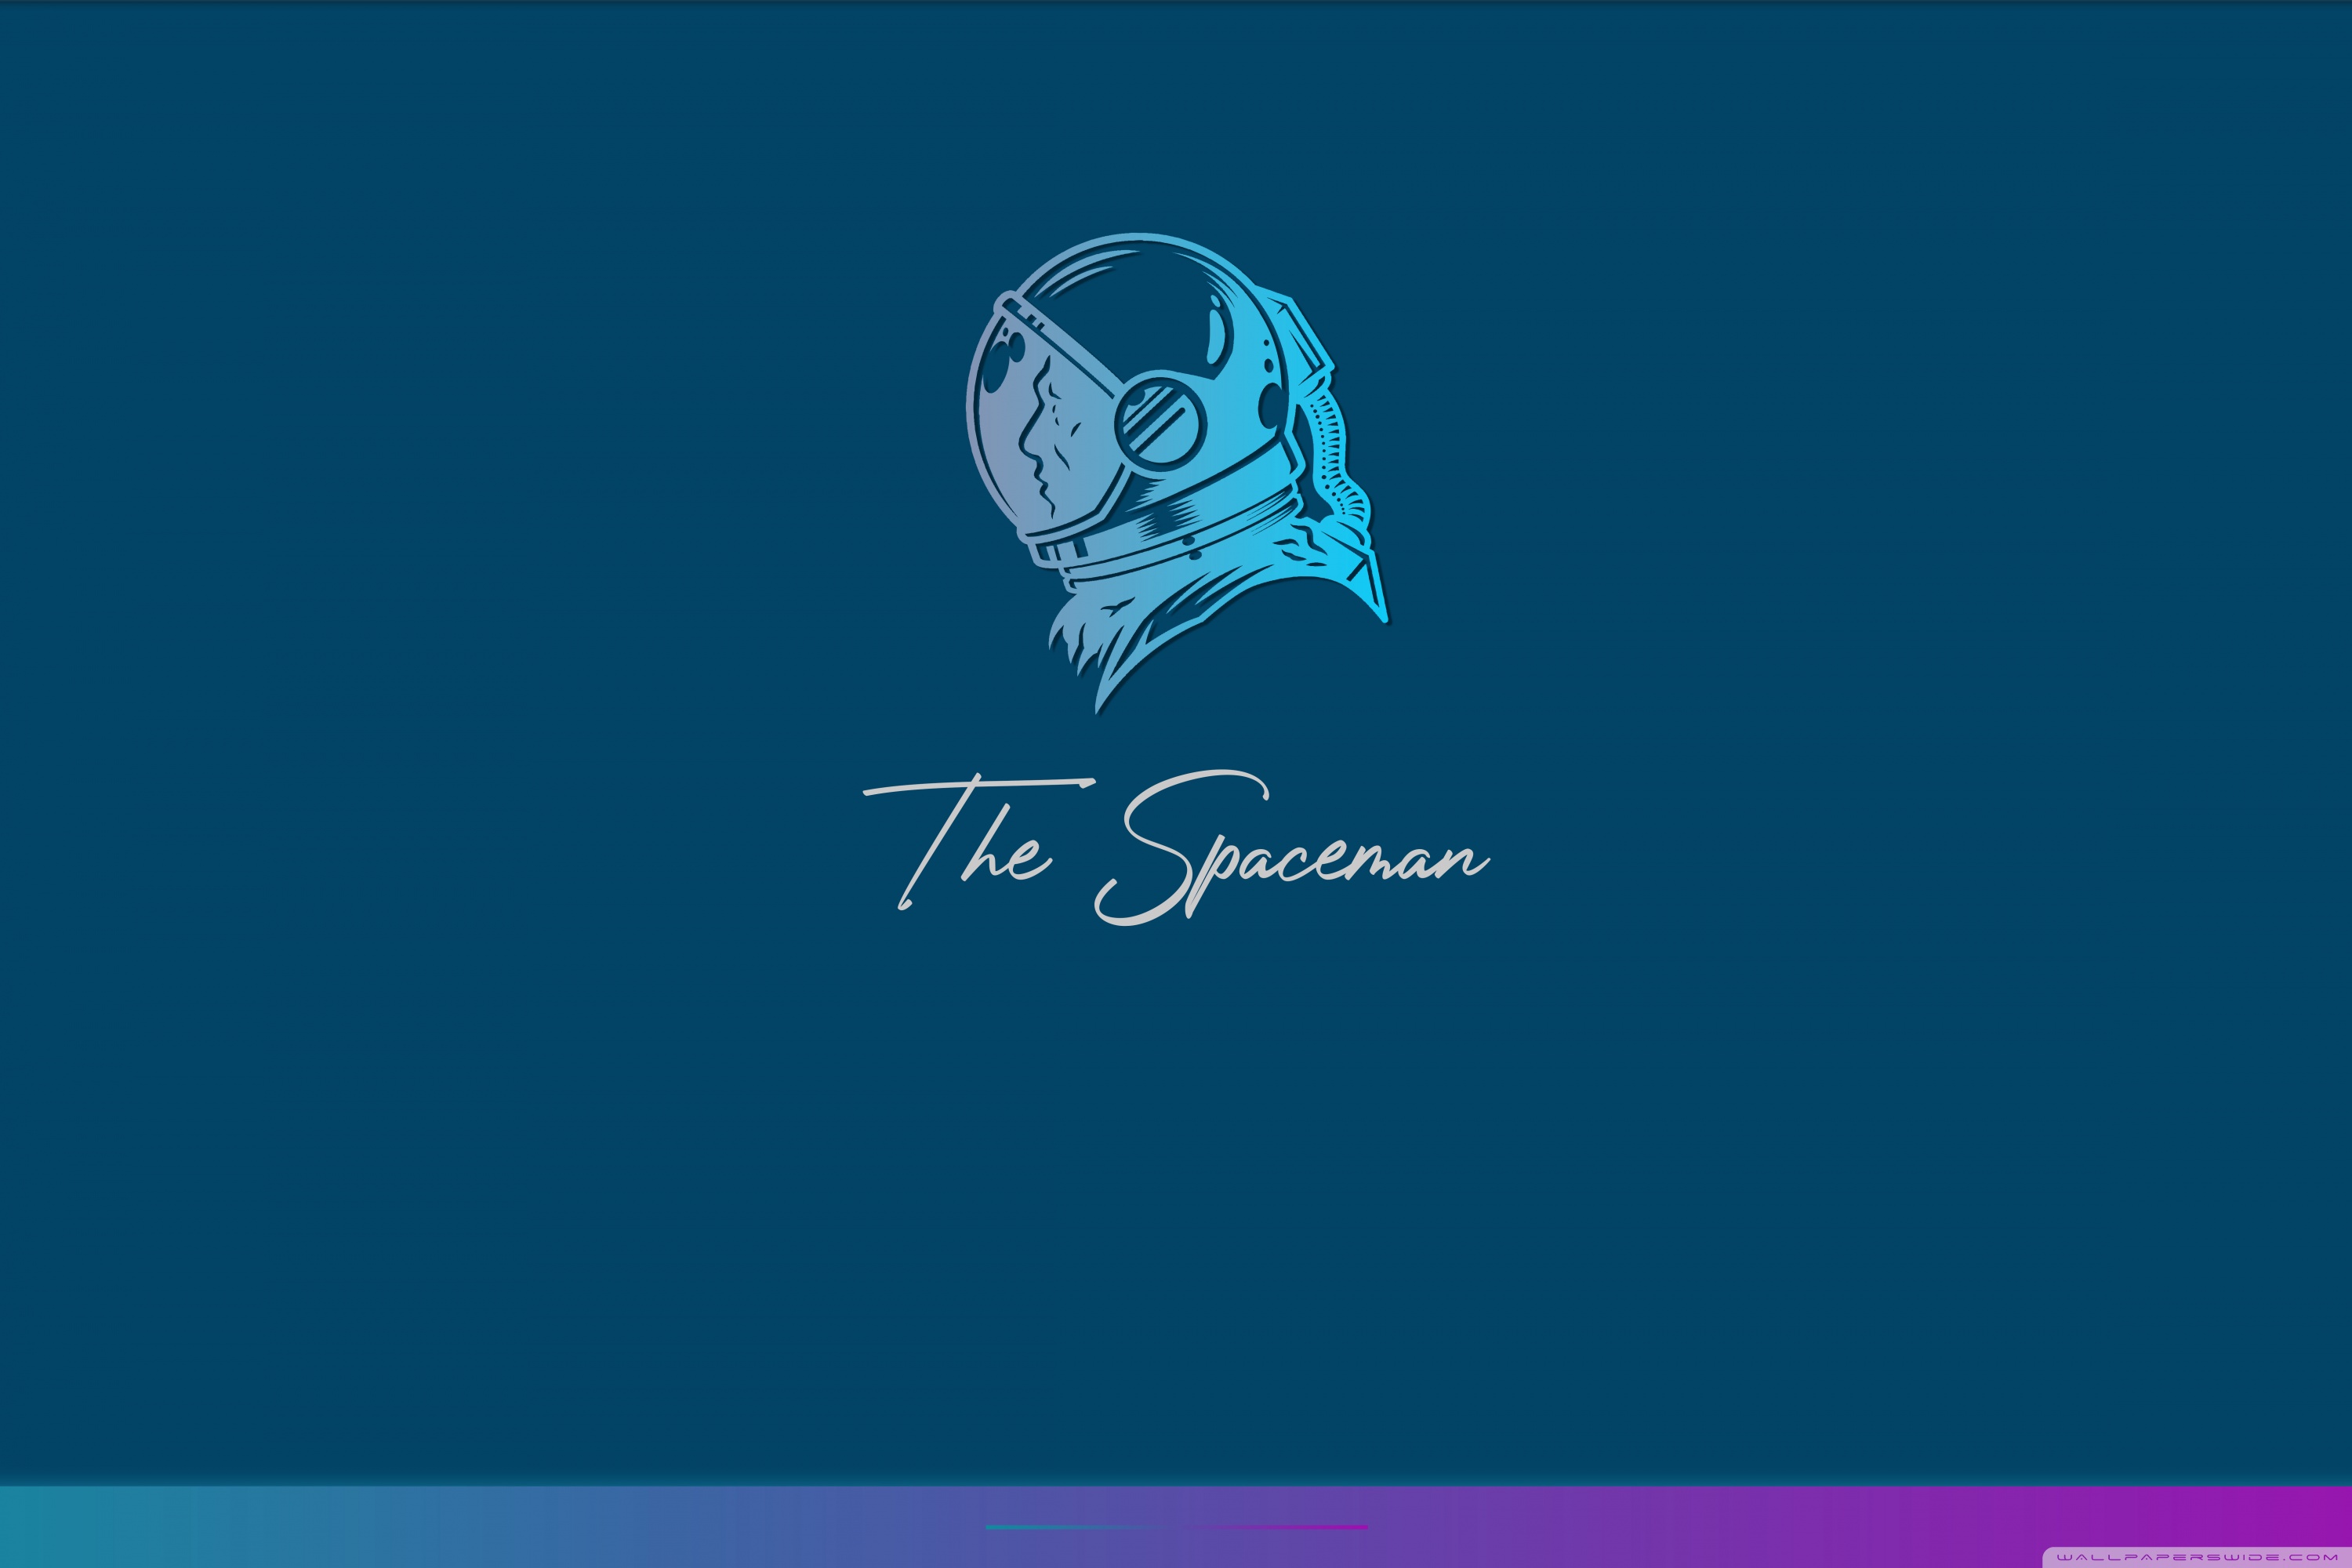 Spaceman 300